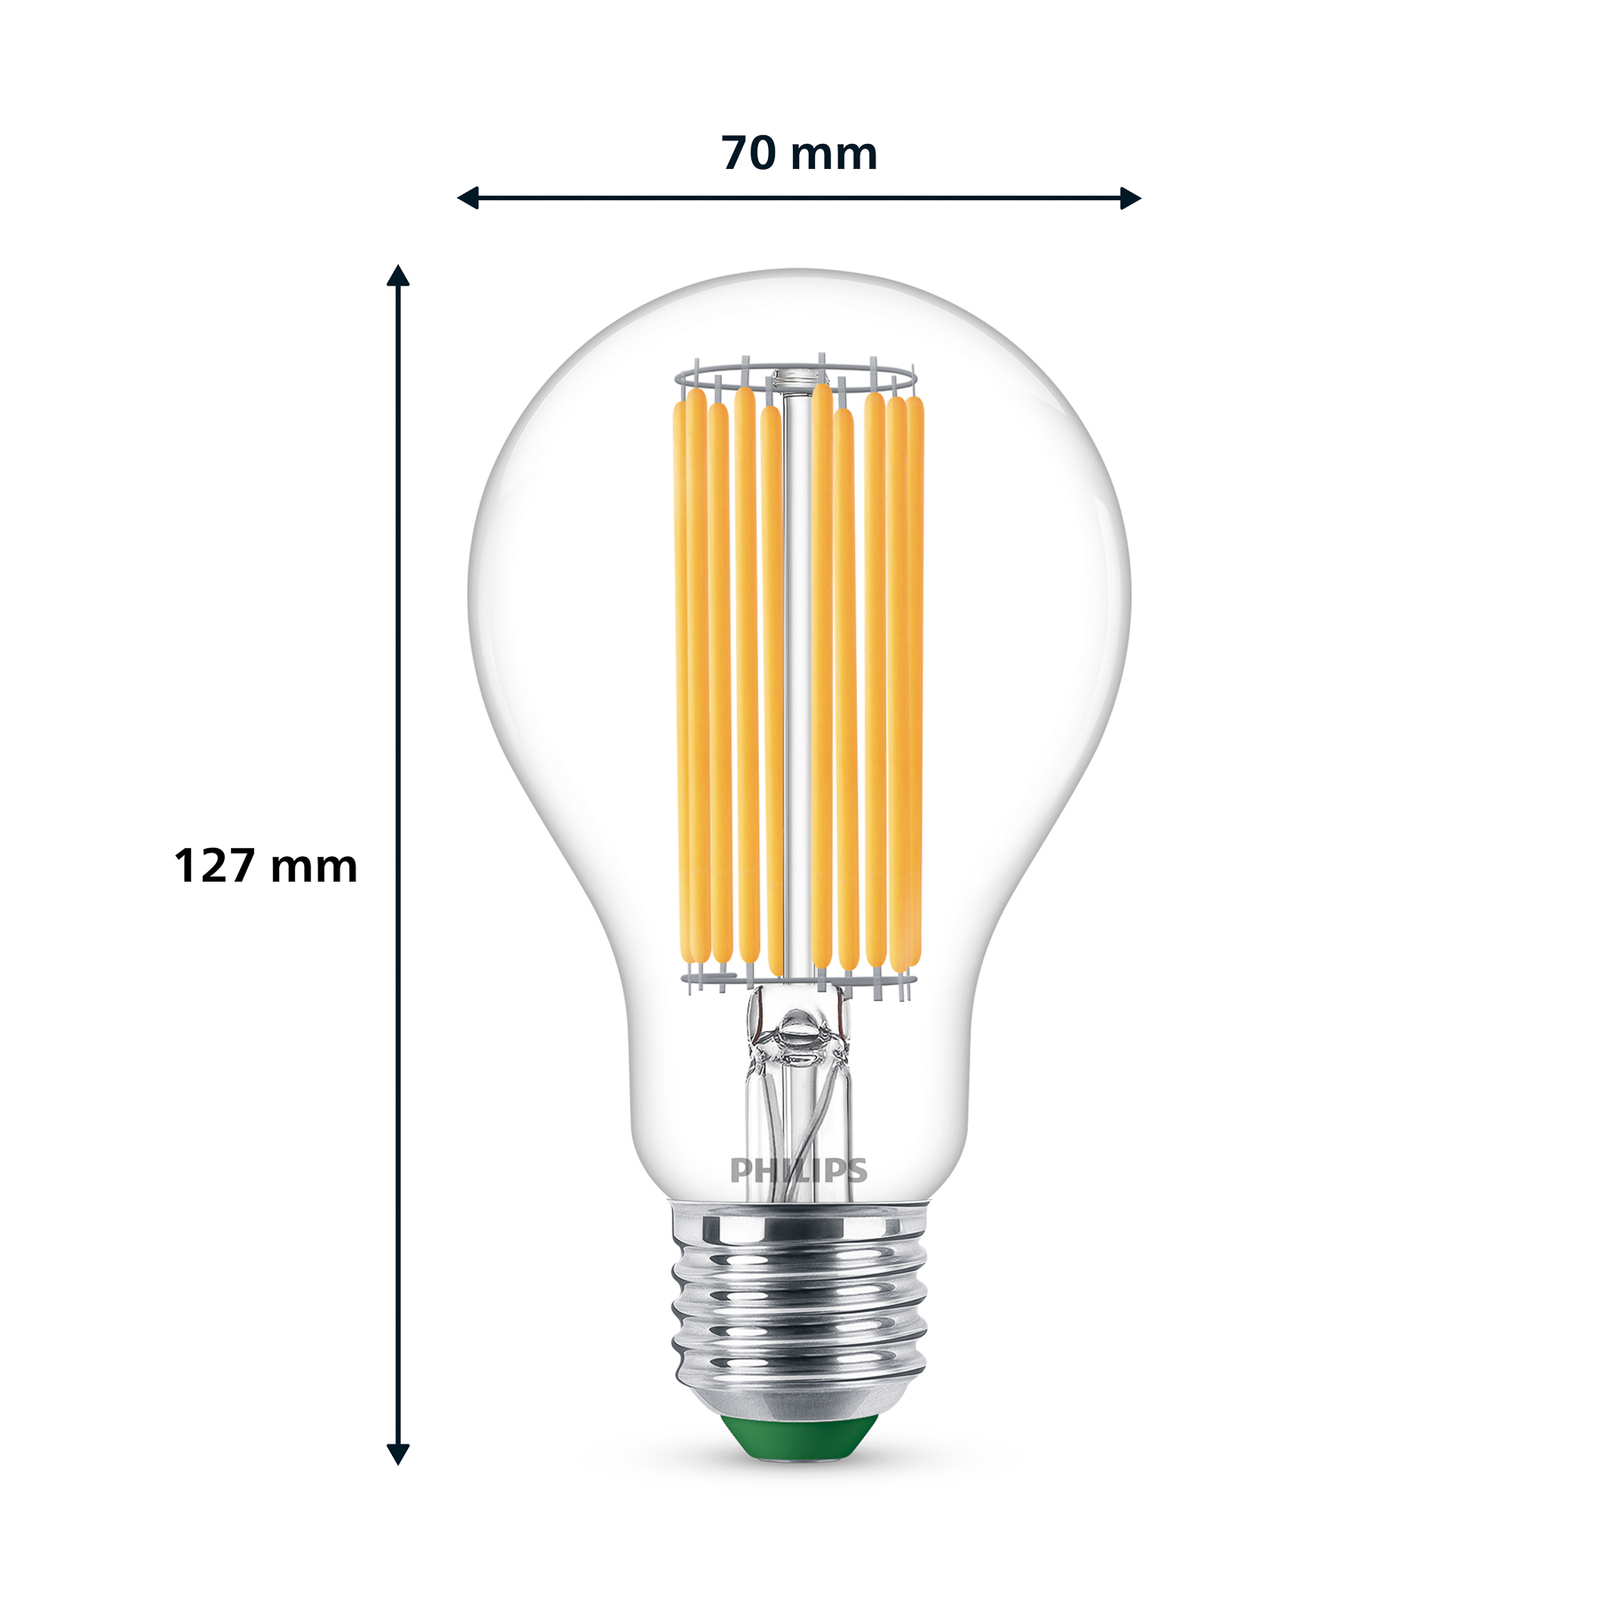 Philips LED E27 A70 5,2 W 1 095 lm claire 3 000 K